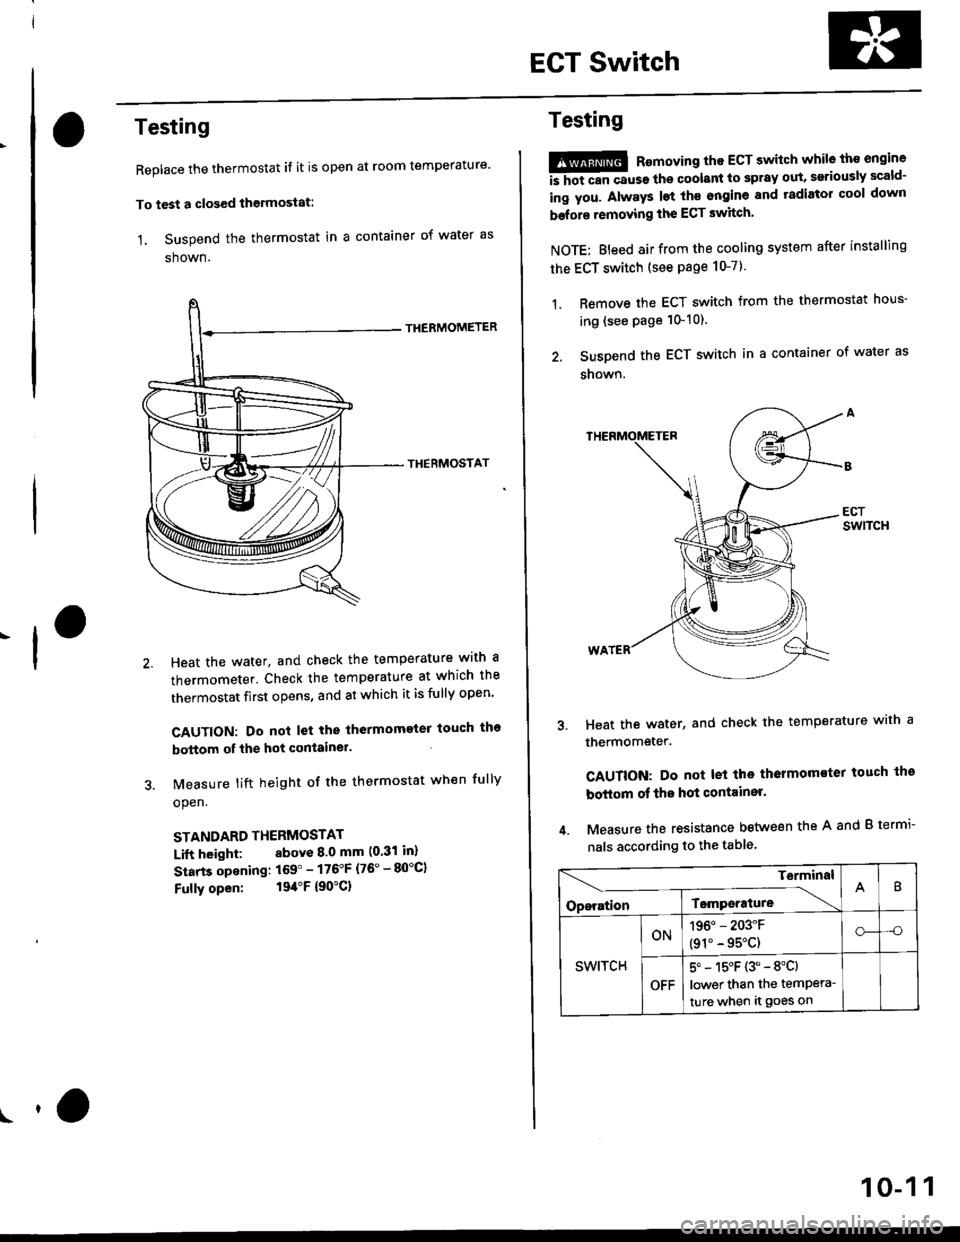 HONDA CIVIC 1998 6.G Workshop Manual EGT Switch
-f
Testing
Replace the thermostat if it is open at room temperature
To test a closed thermostat:
1, Suspend the thermostat in a container of water as
shown.
THEBMOMETER
THERMOSTAT
Heat the